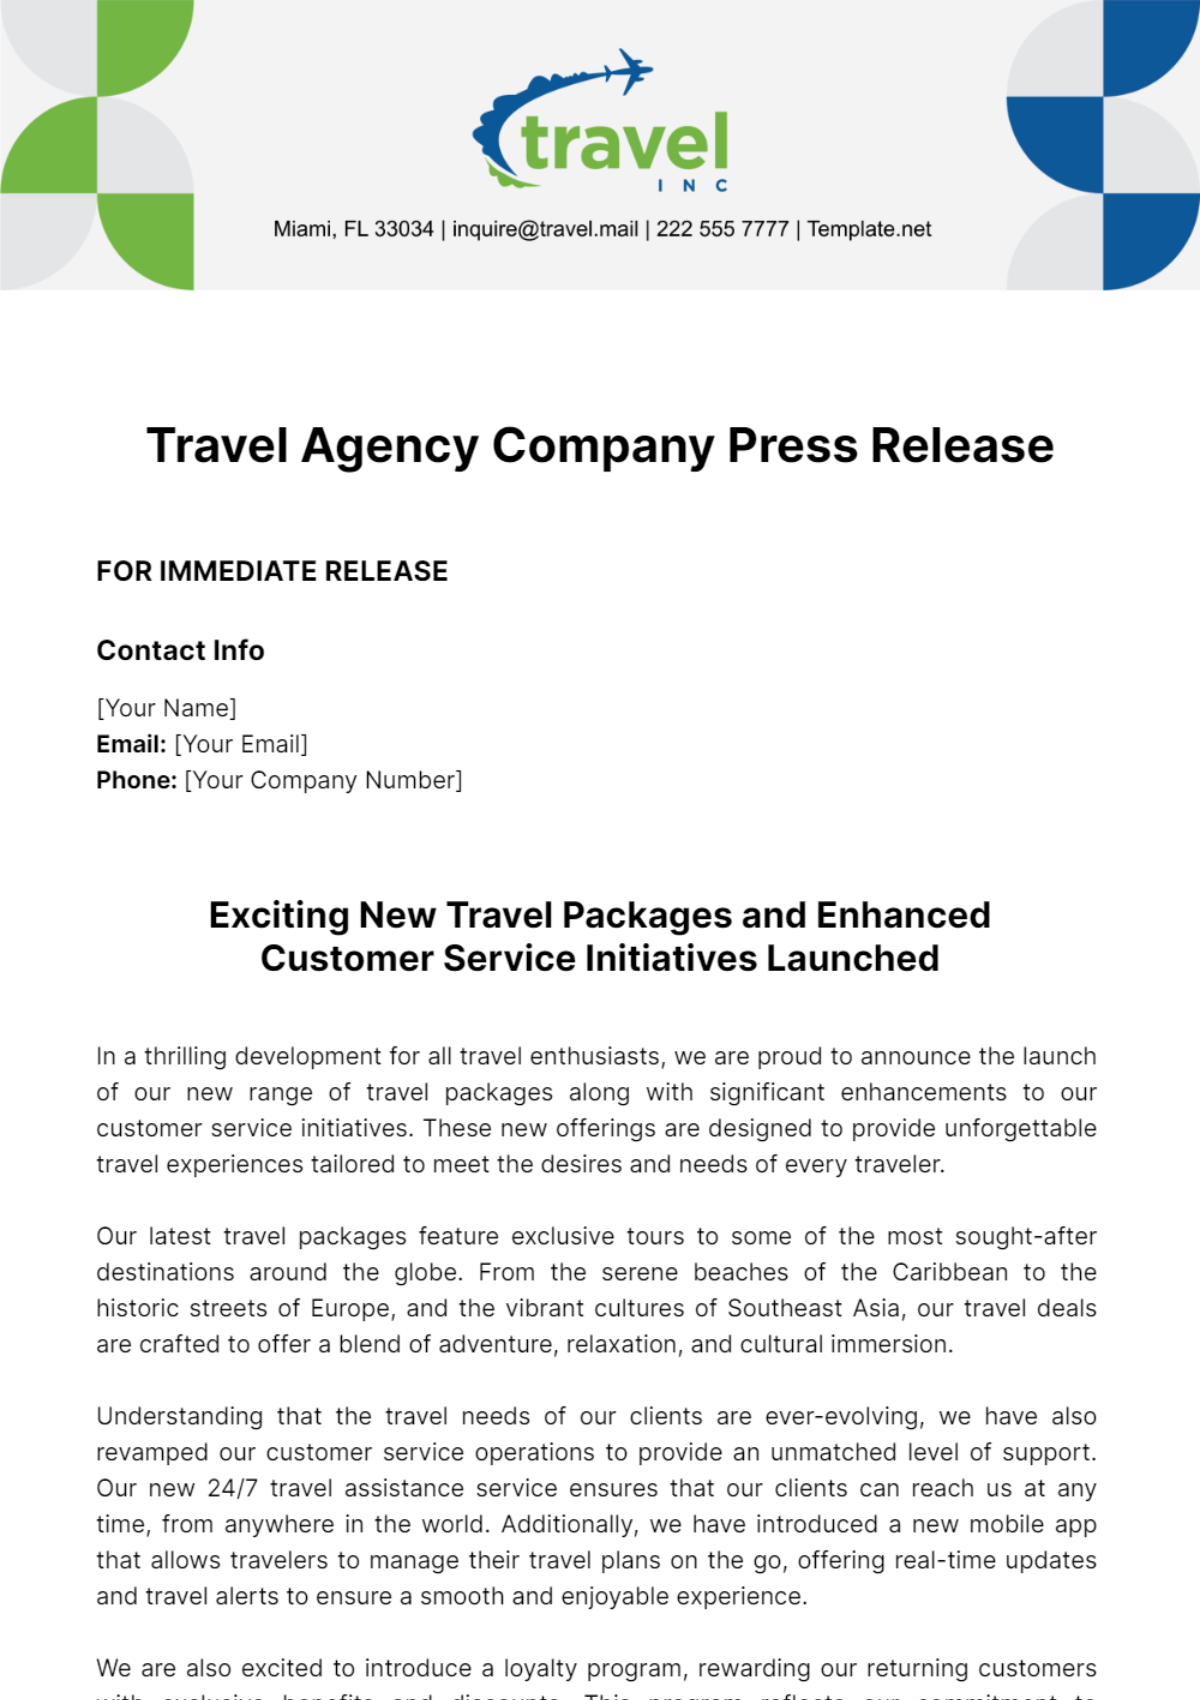 Travel Agency Company Press Release Template